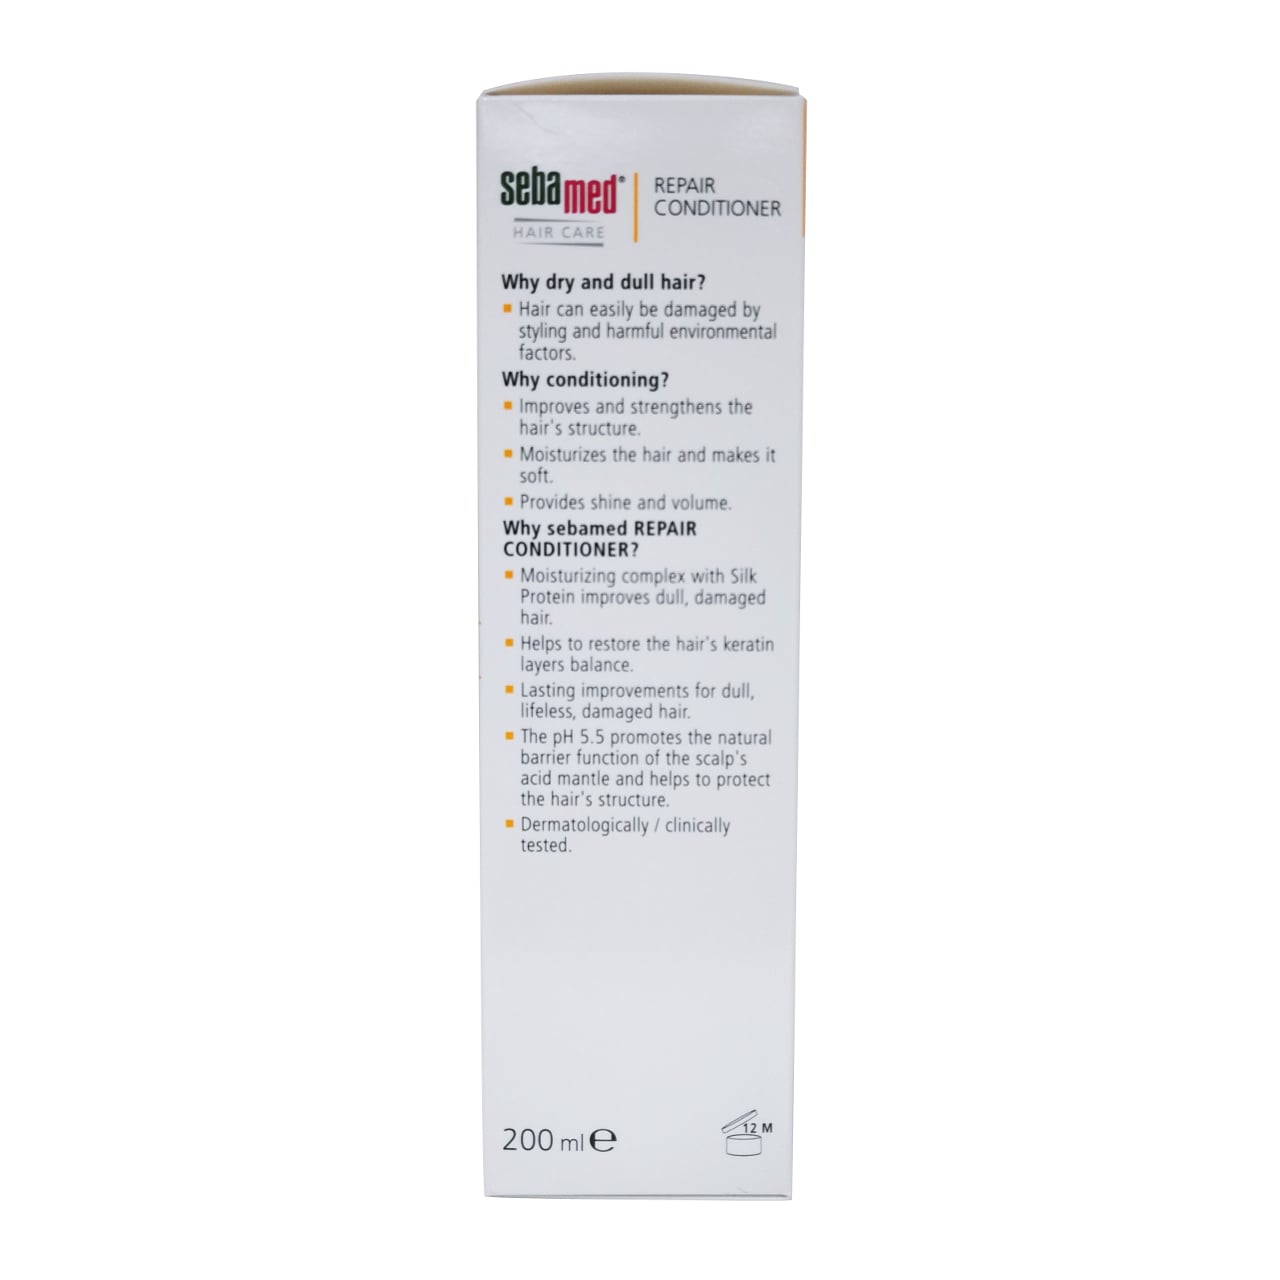 Product details for Sebamed Hair Care Repair Conditioner